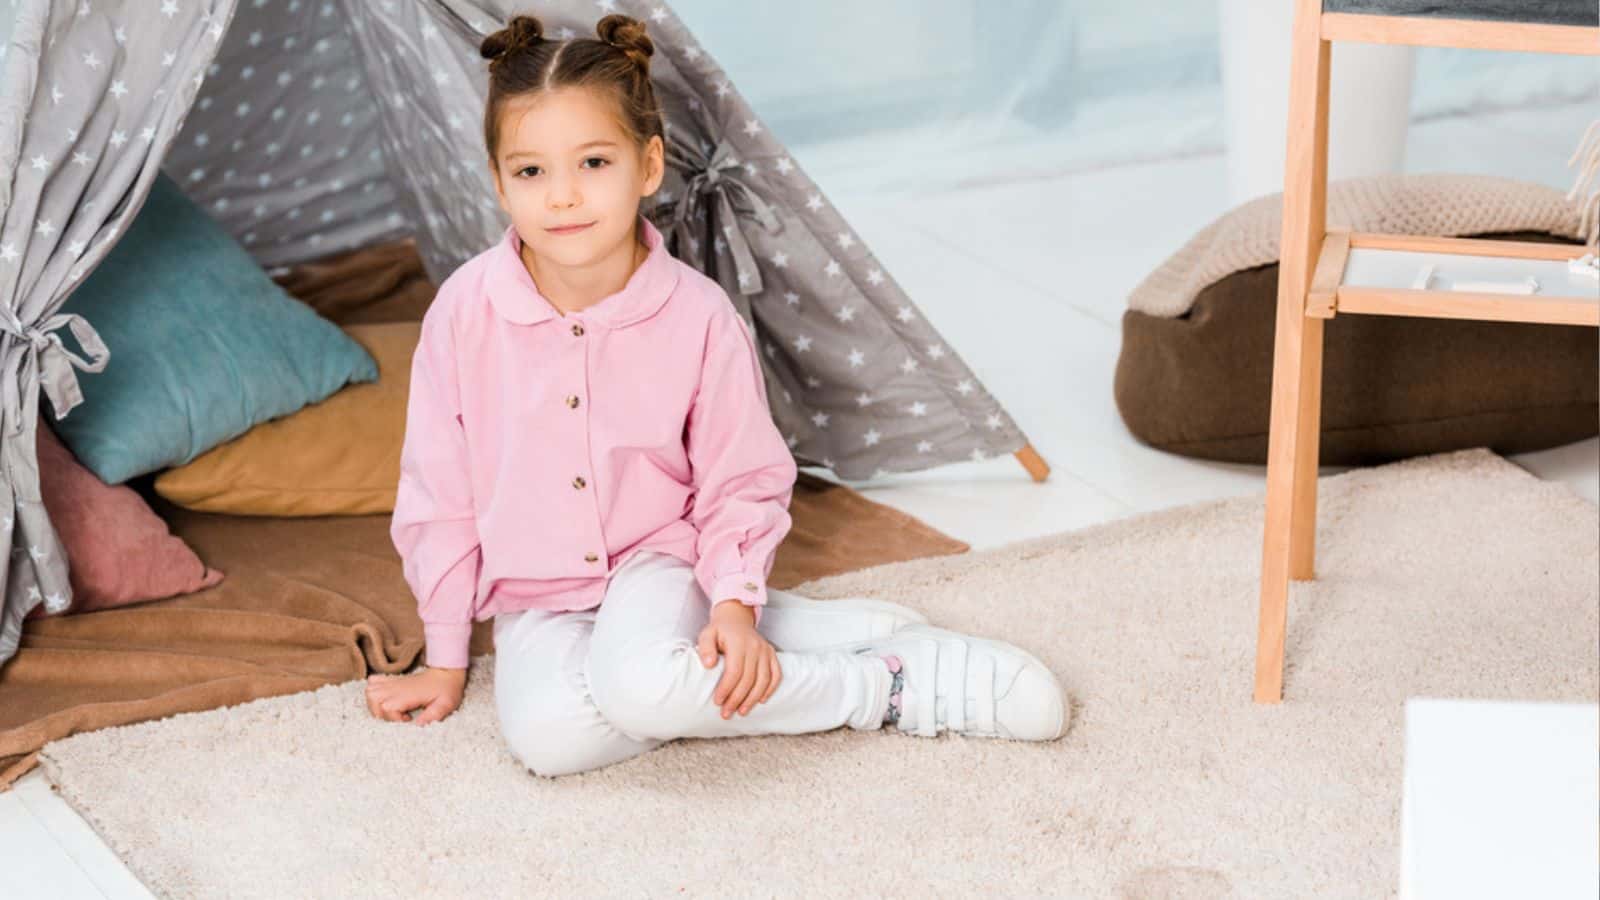 High angle view of adorable little girl sitting on carpet and smiling at camera